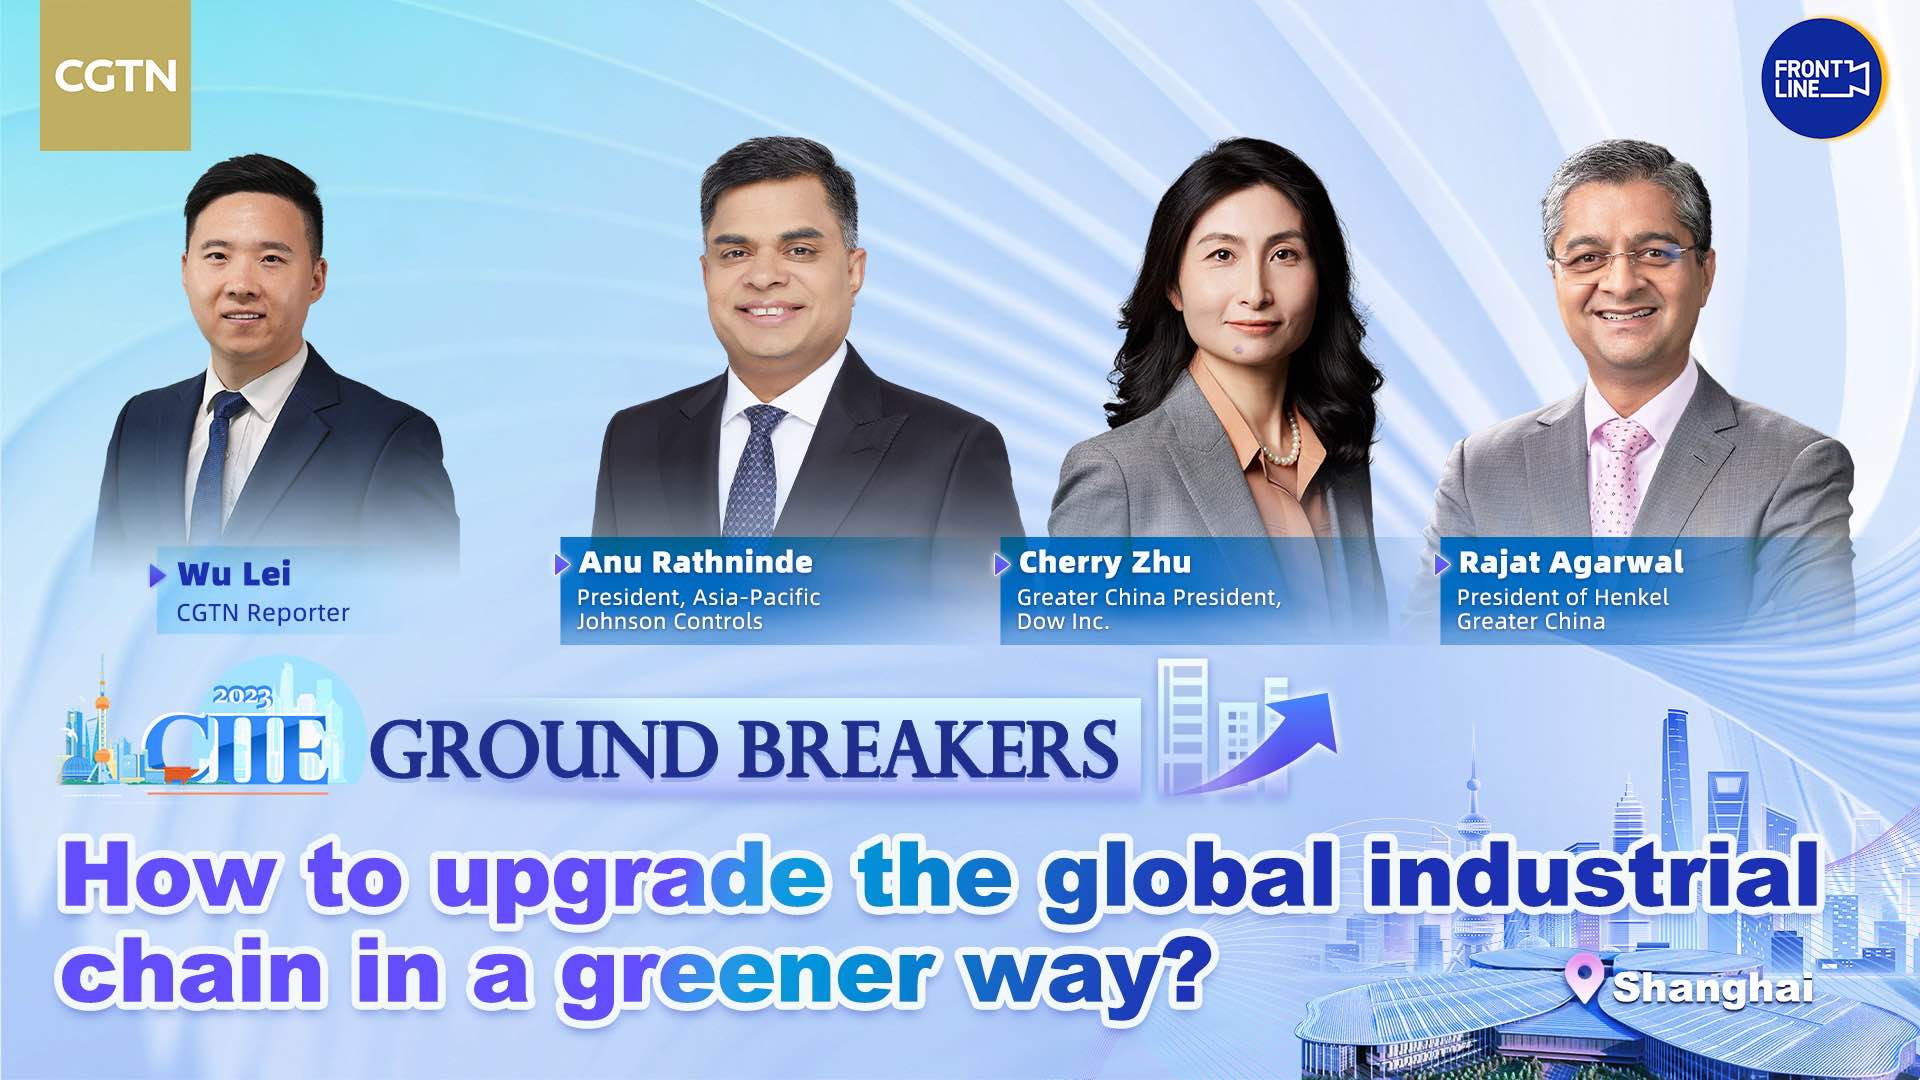 Live: CIIE Ground Breakers – How to upgrade the global industrial chain in a greener way